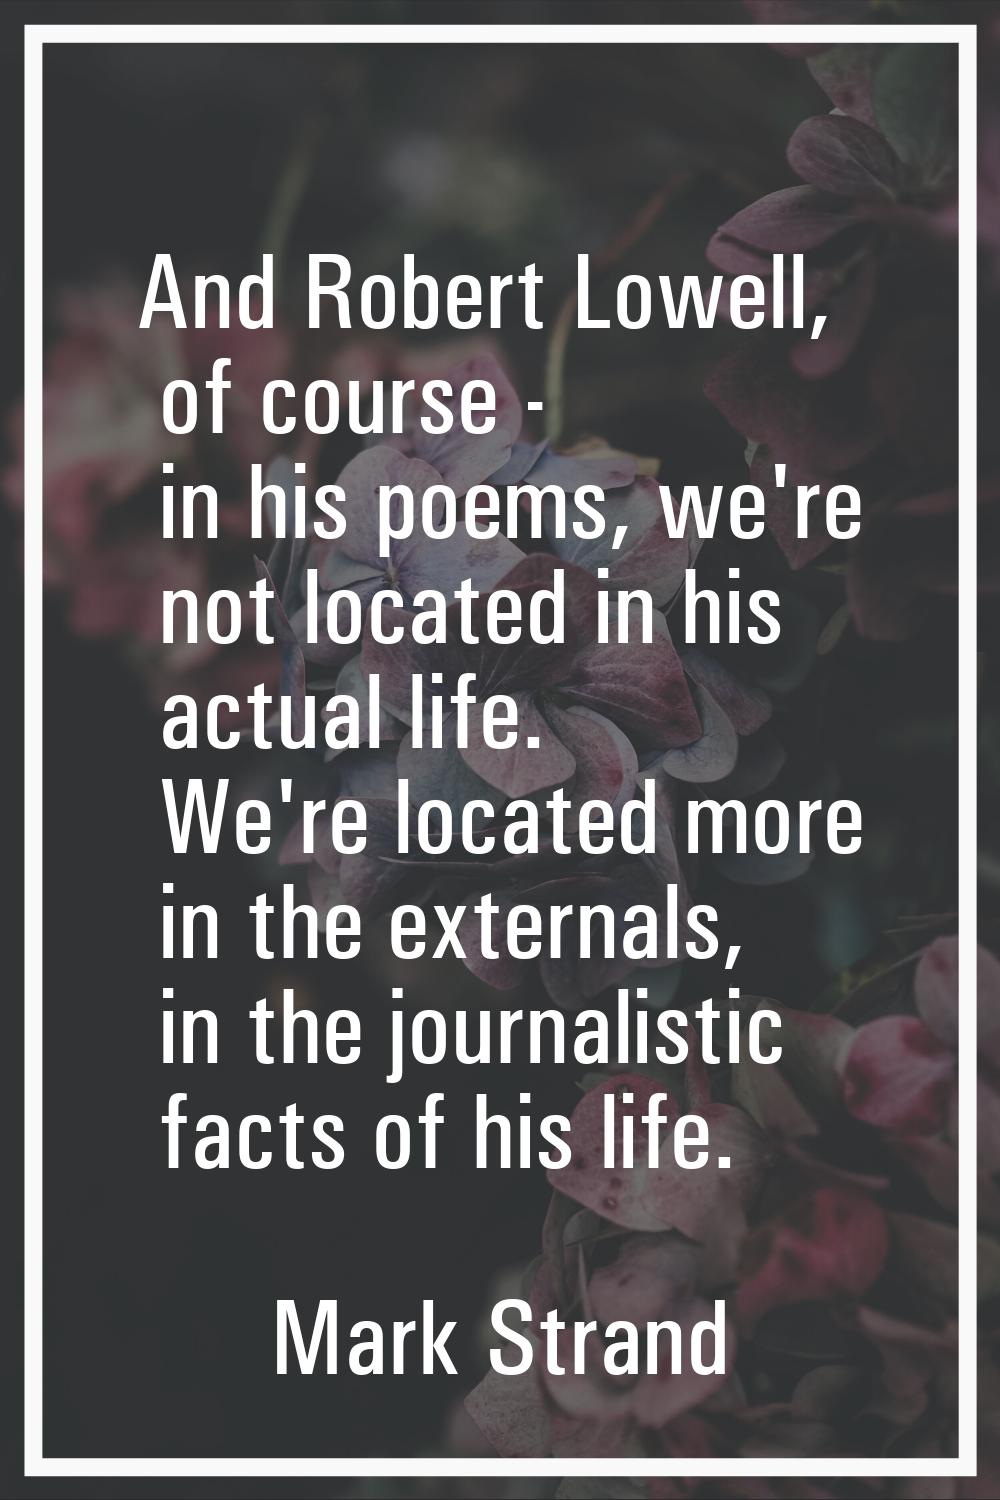 And Robert Lowell, of course - in his poems, we're not located in his actual life. We're located mo